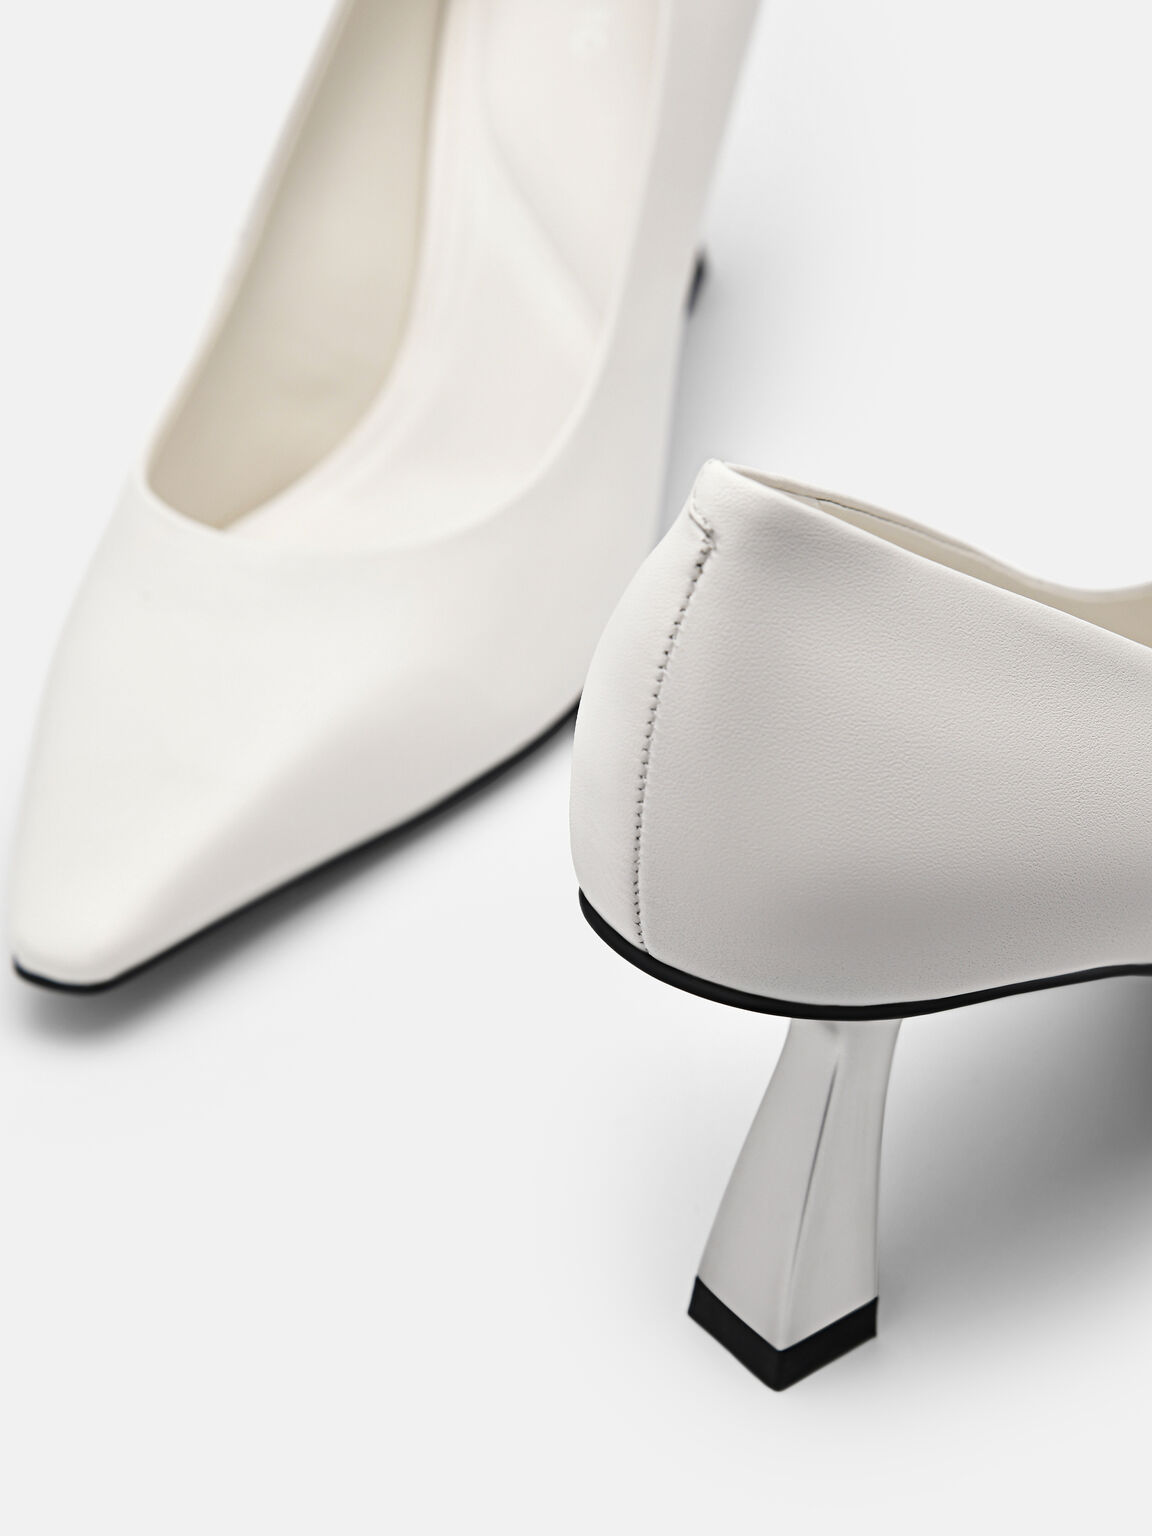 Amelie Leather Pumps, White